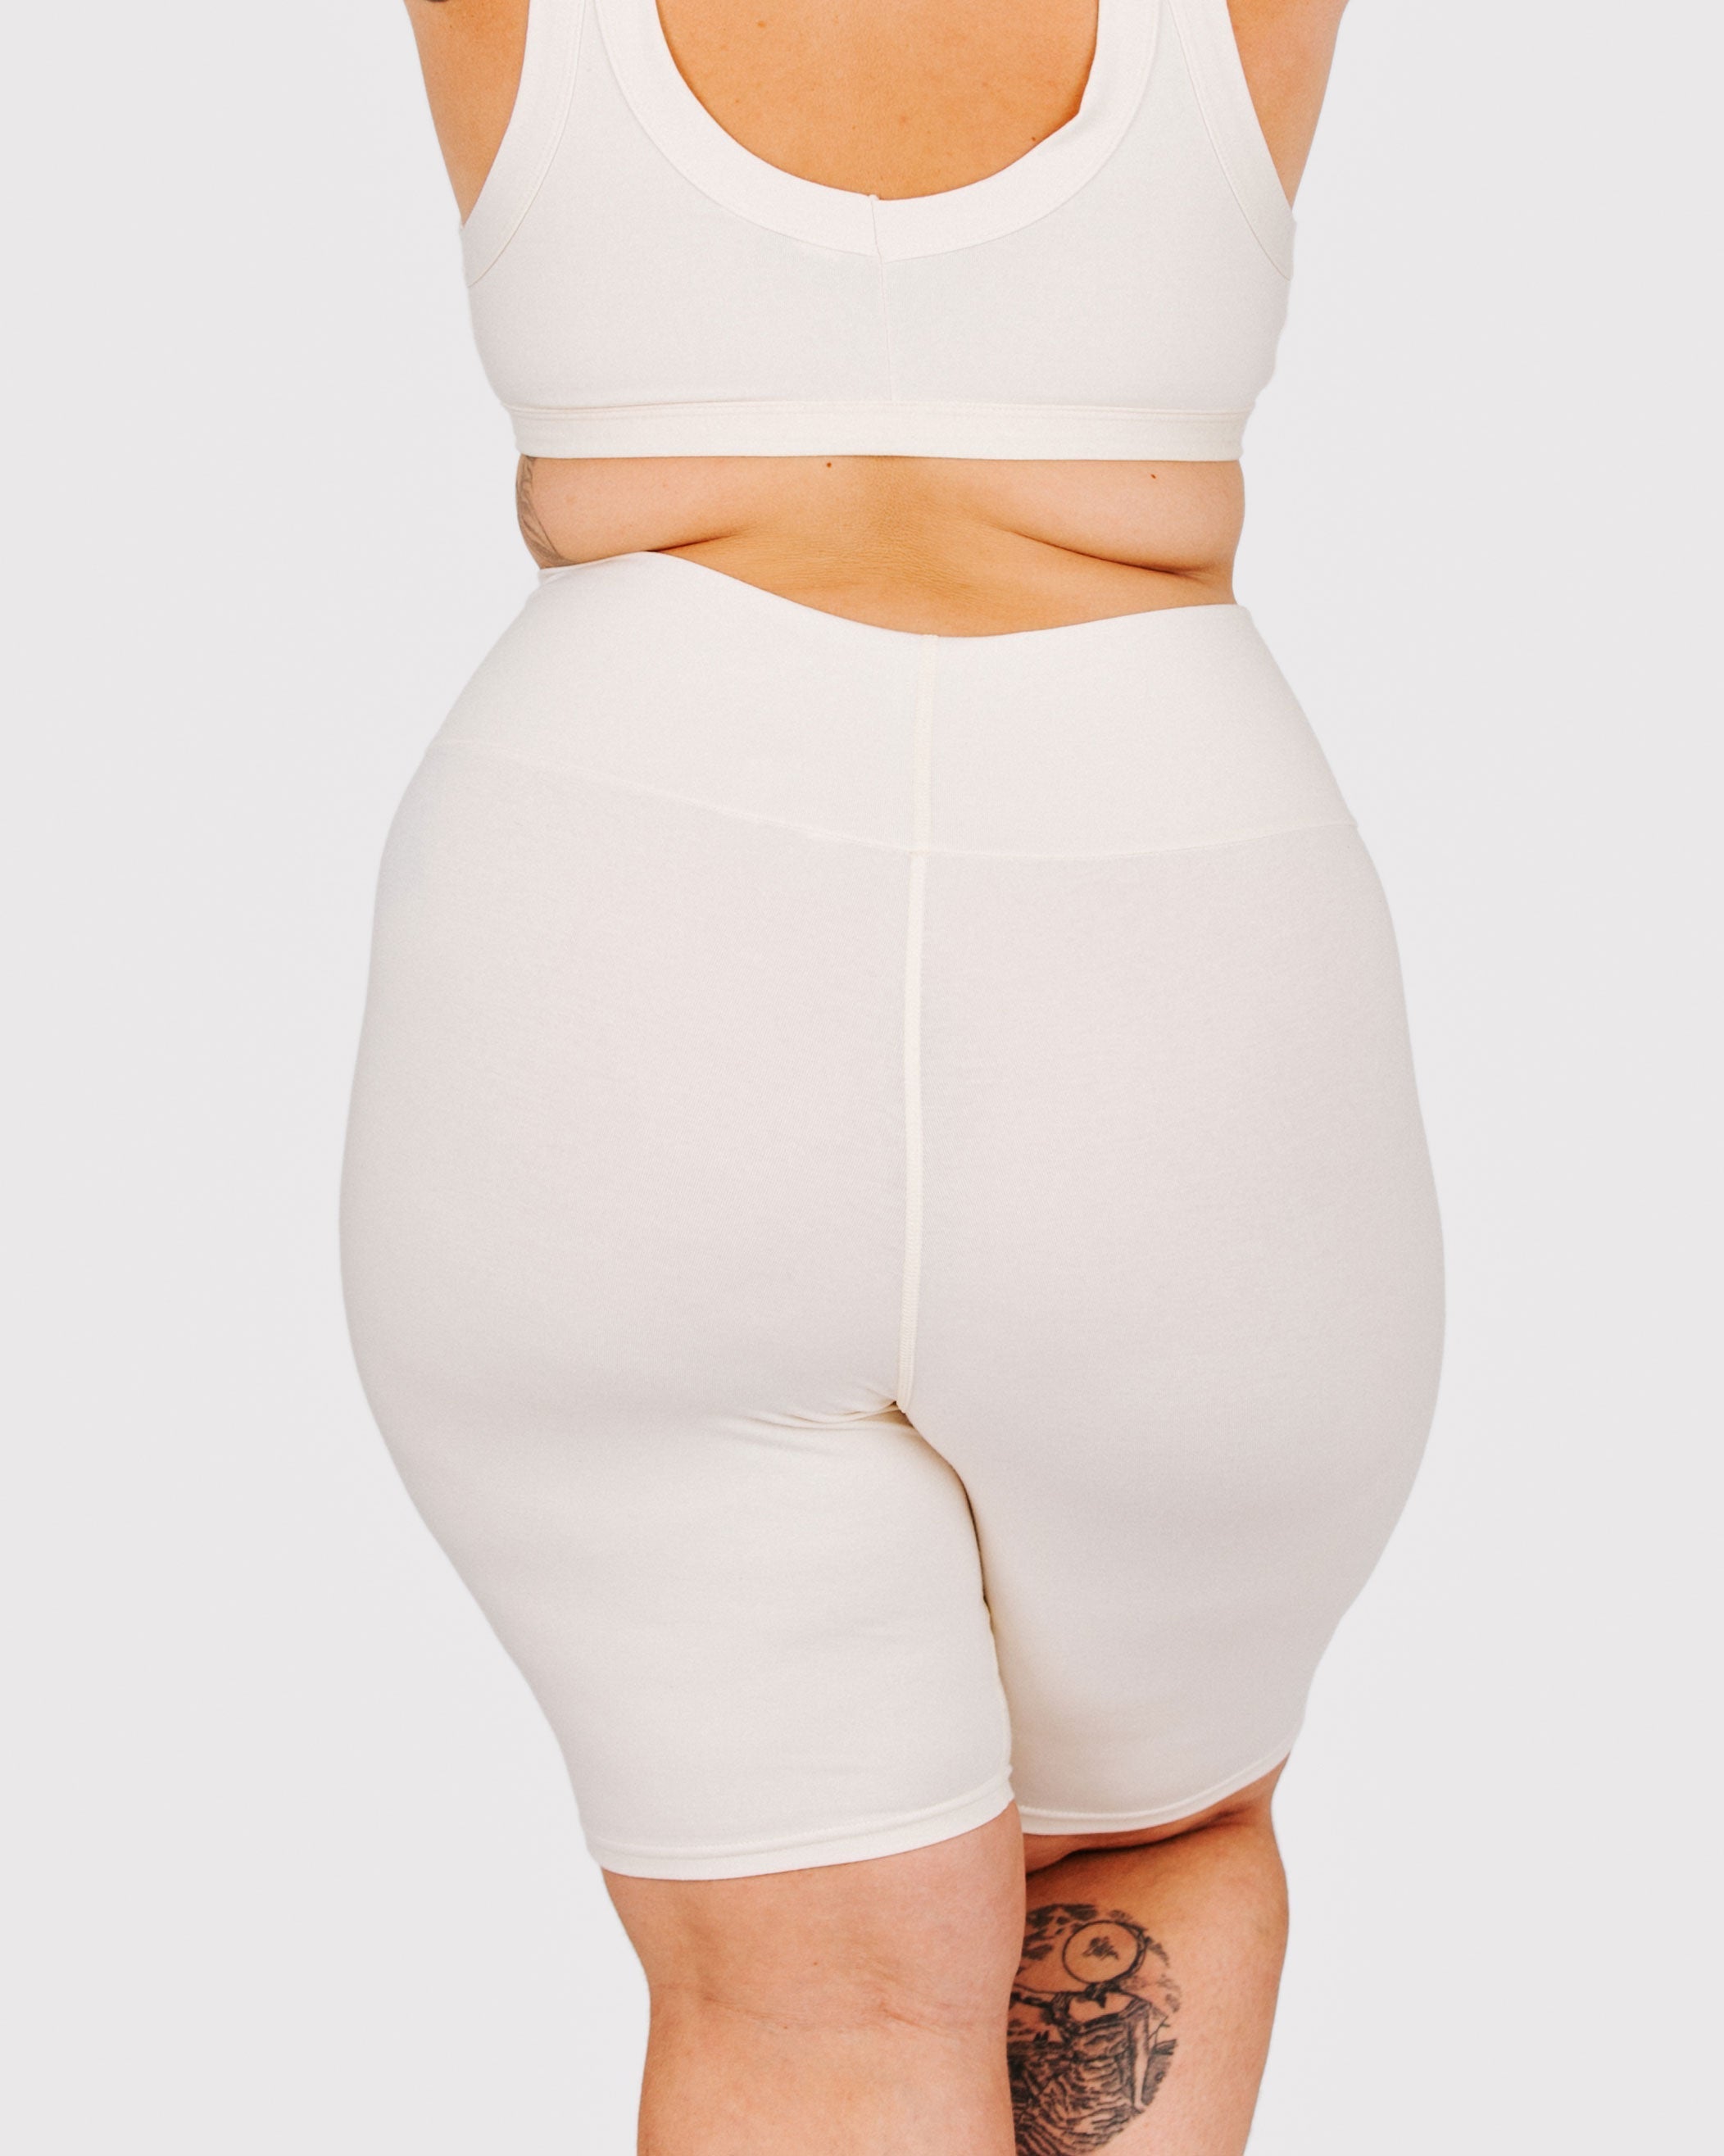 Fit photo from the back of Thunderpants organic cotton Bike Shorts in off-white on a model.